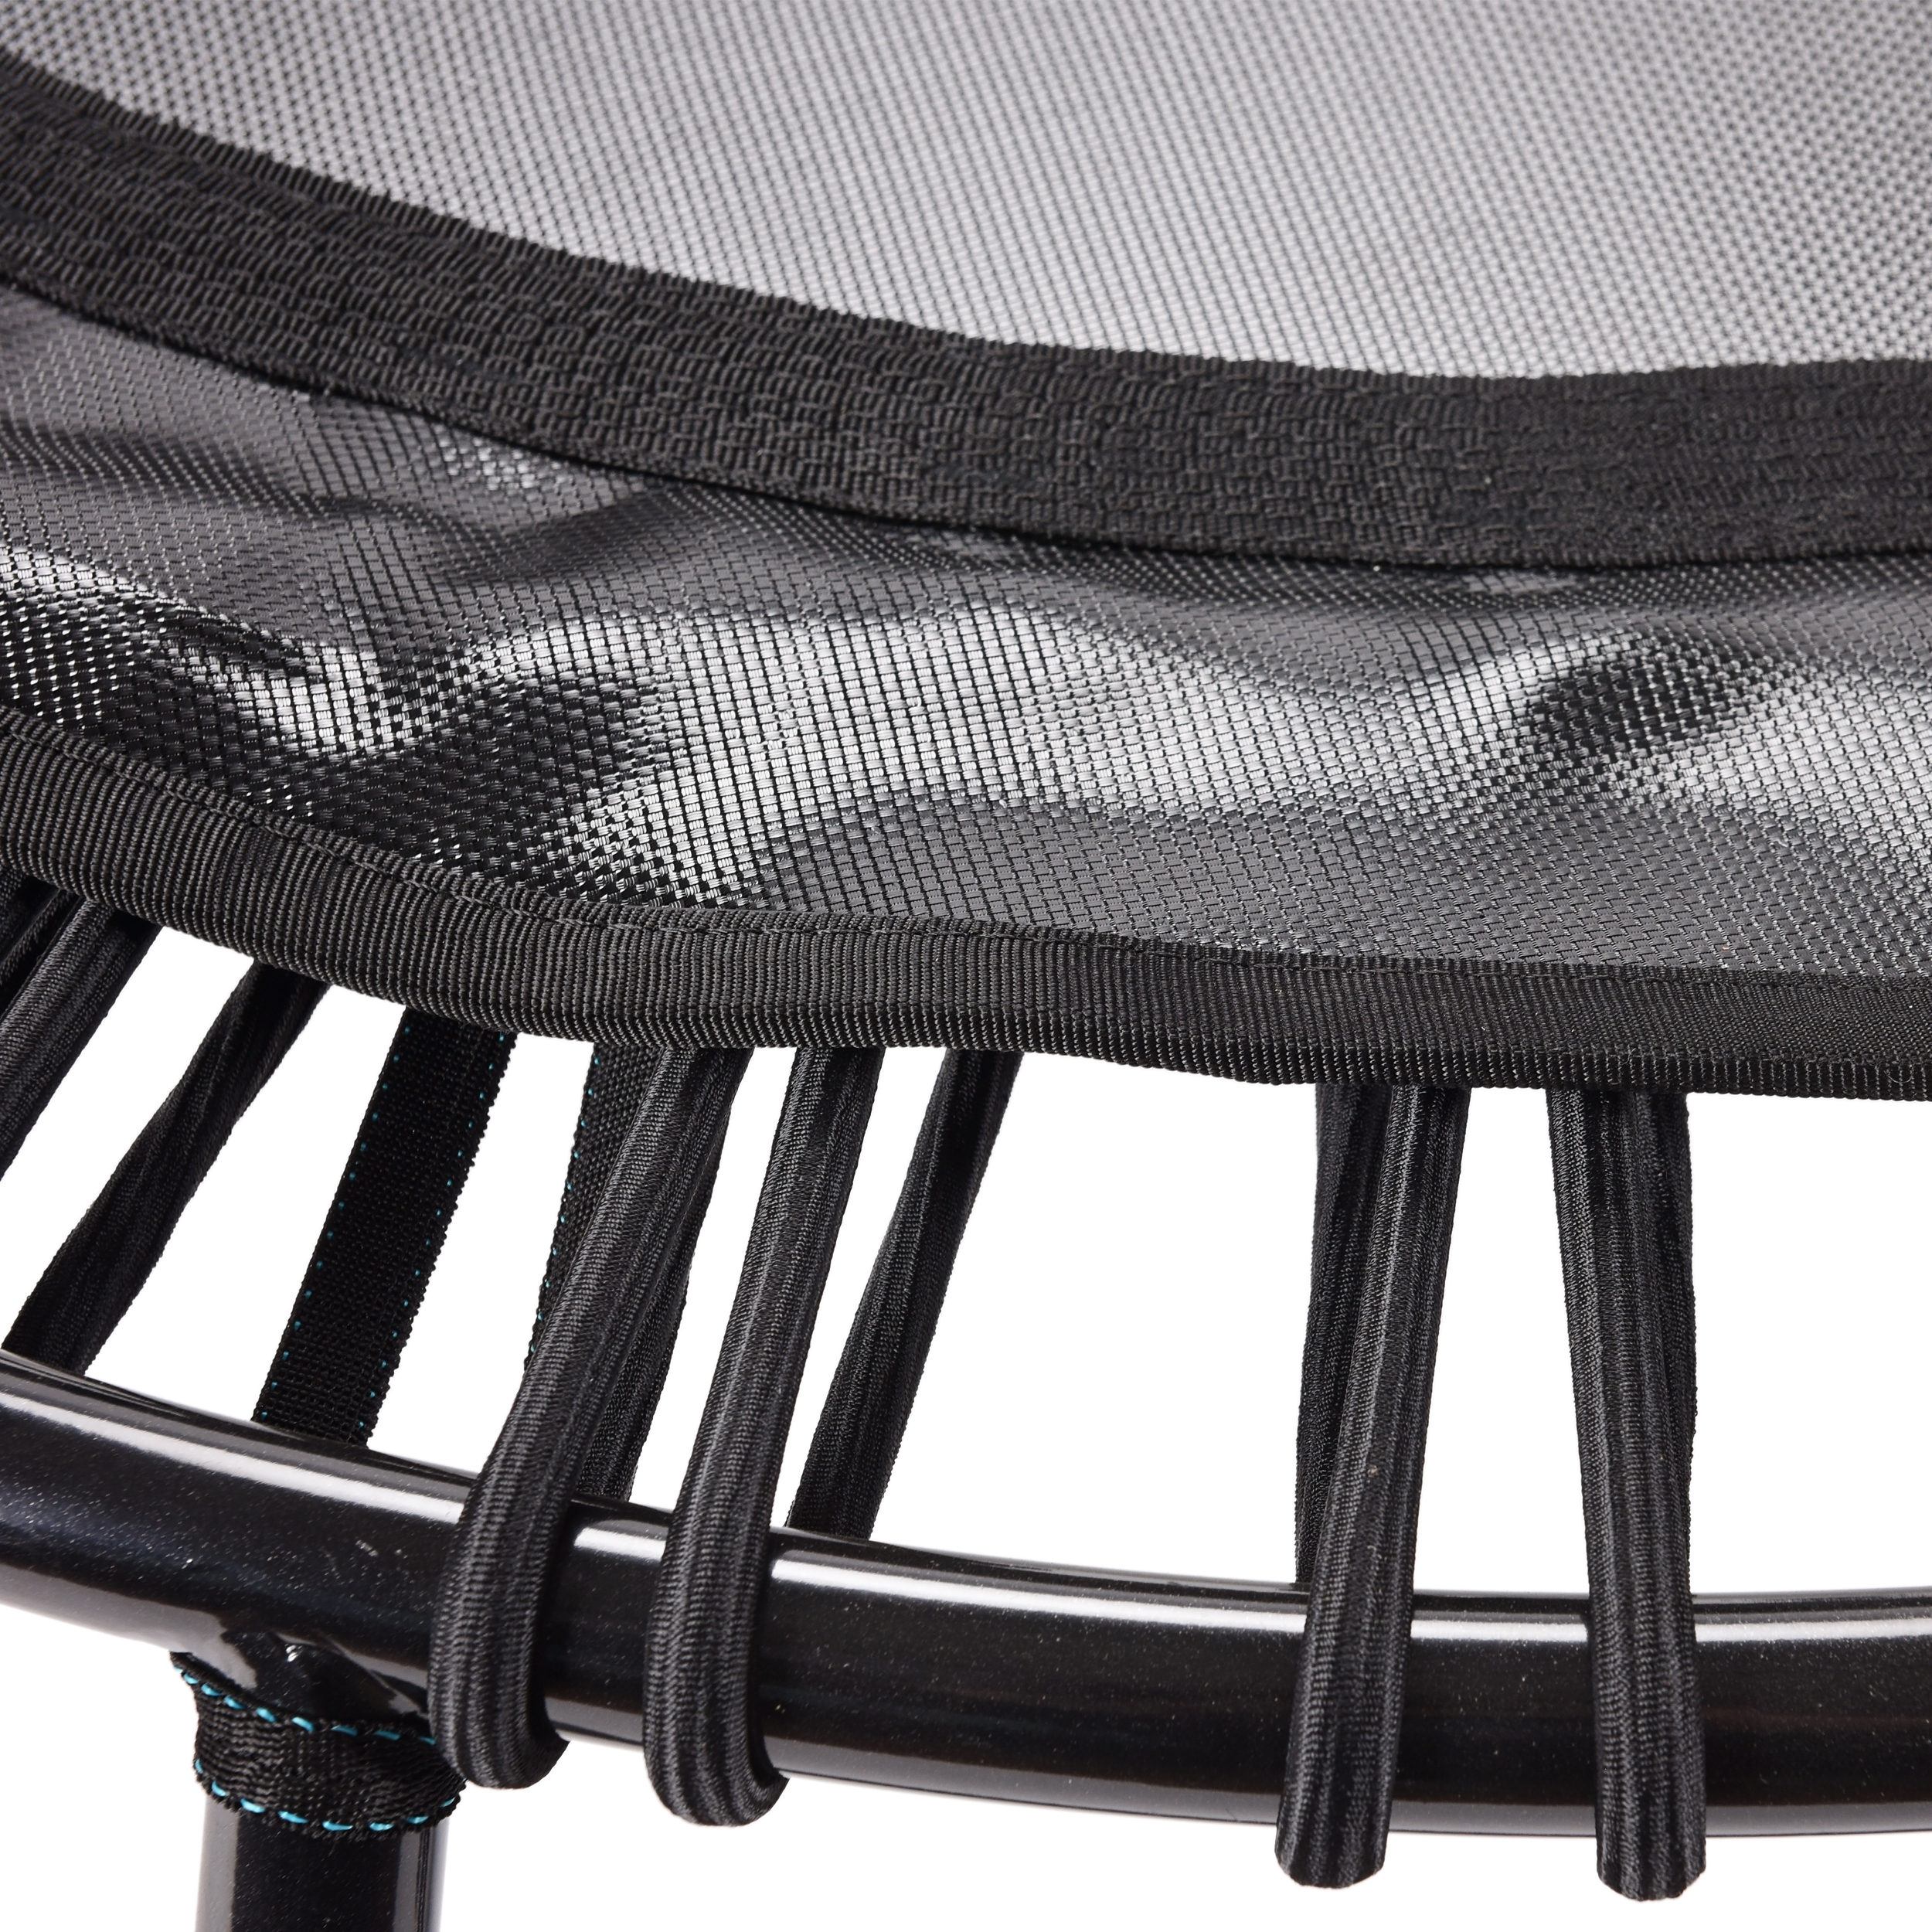 Metode vedholdende Ciro JumpSport Home 120 Fitness Trampoline - Stamina Products